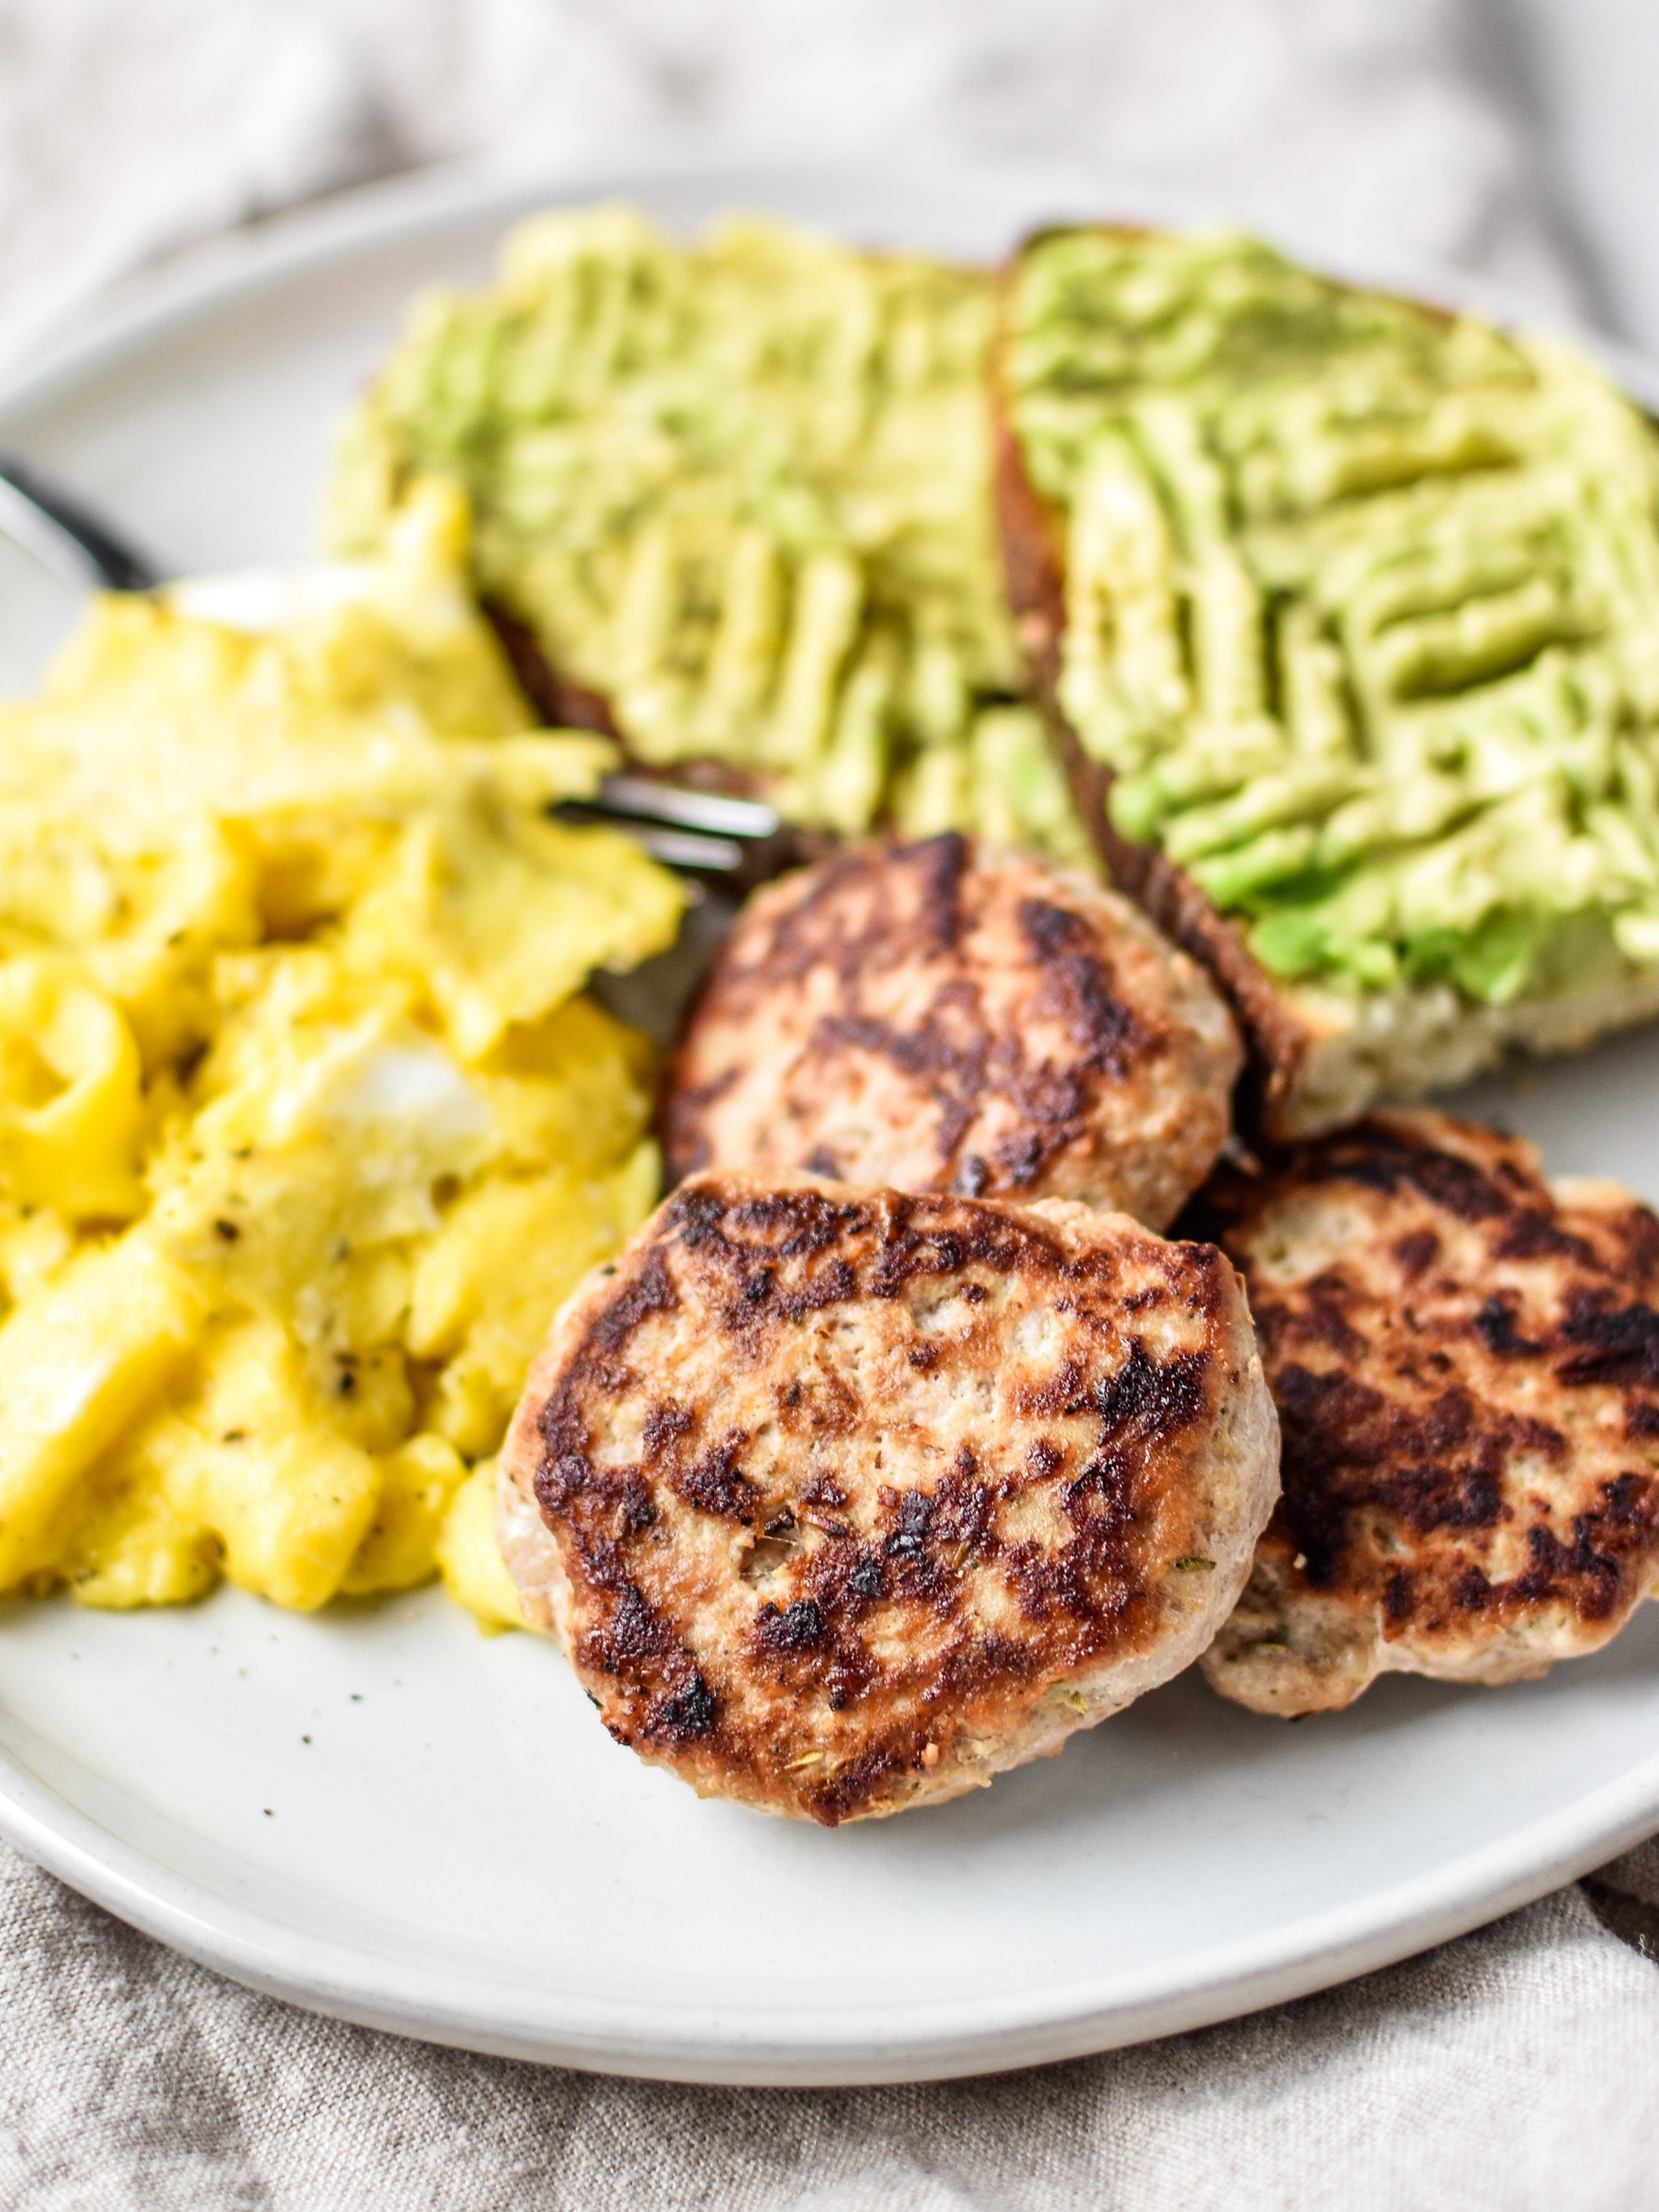 A plate of ground turkey breakfast sausage patties with eggs and avocado toast.